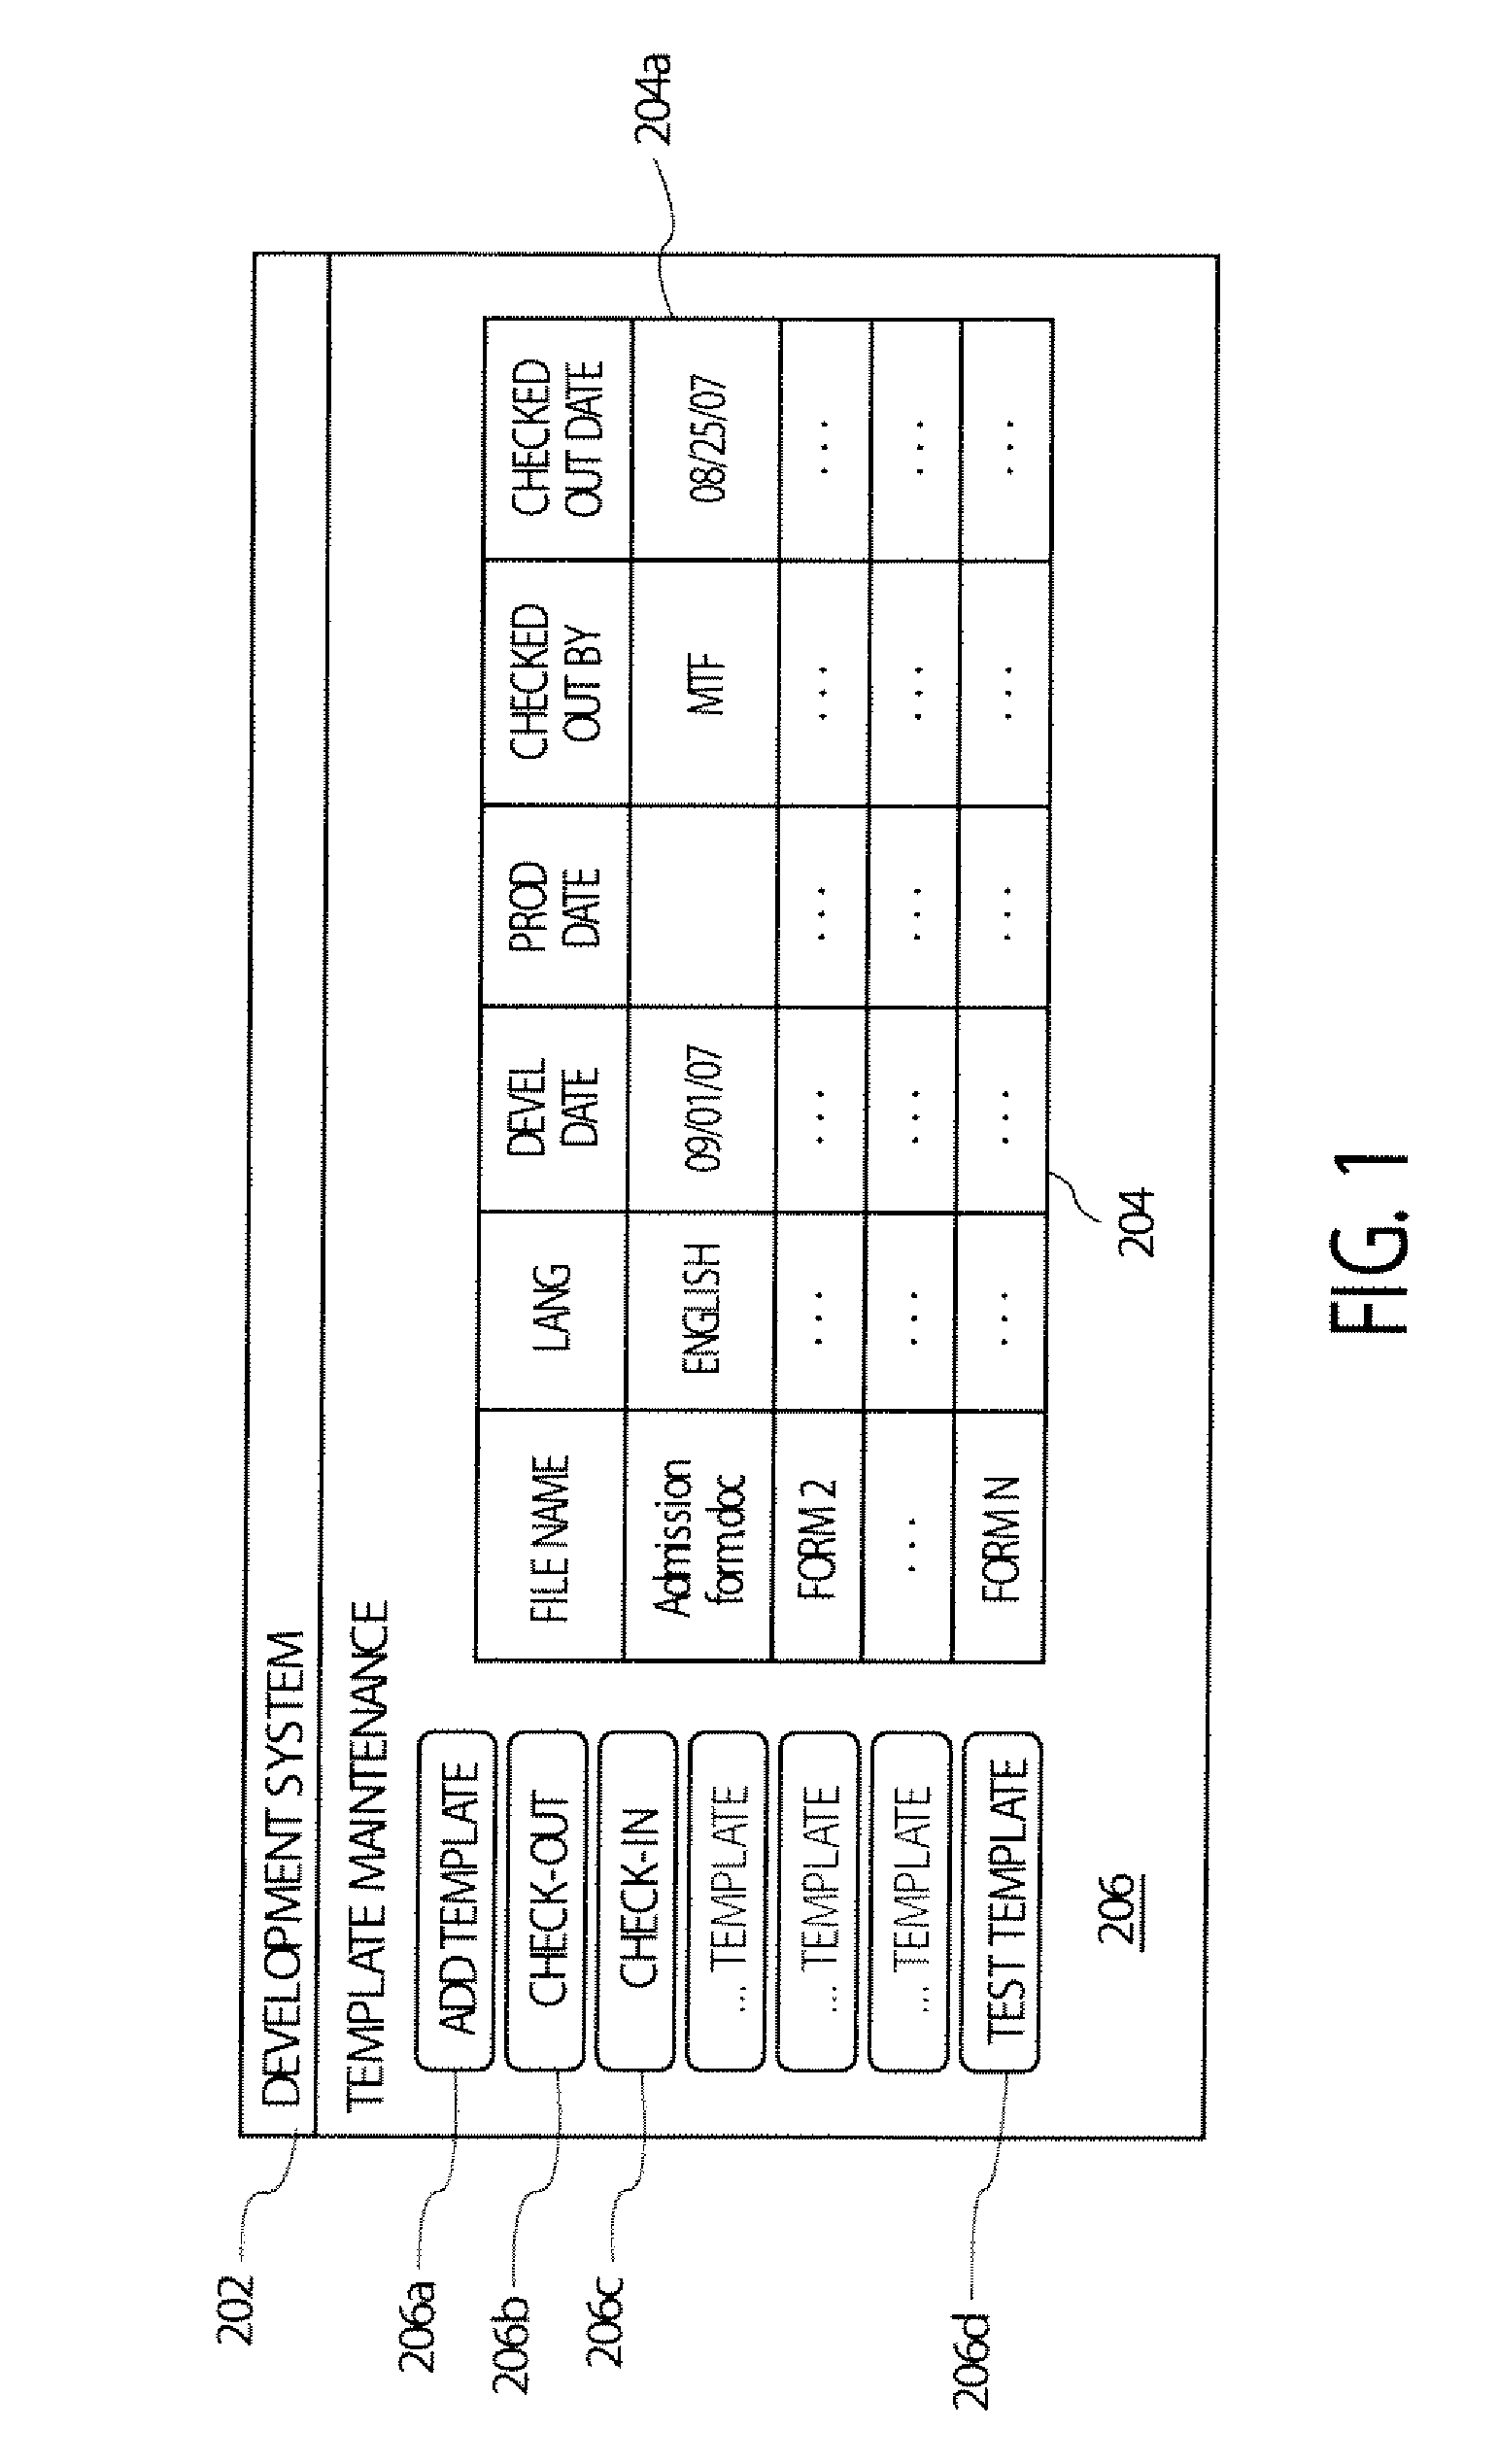 System for Processing and Testing of Electronic Forms and Associated Templates